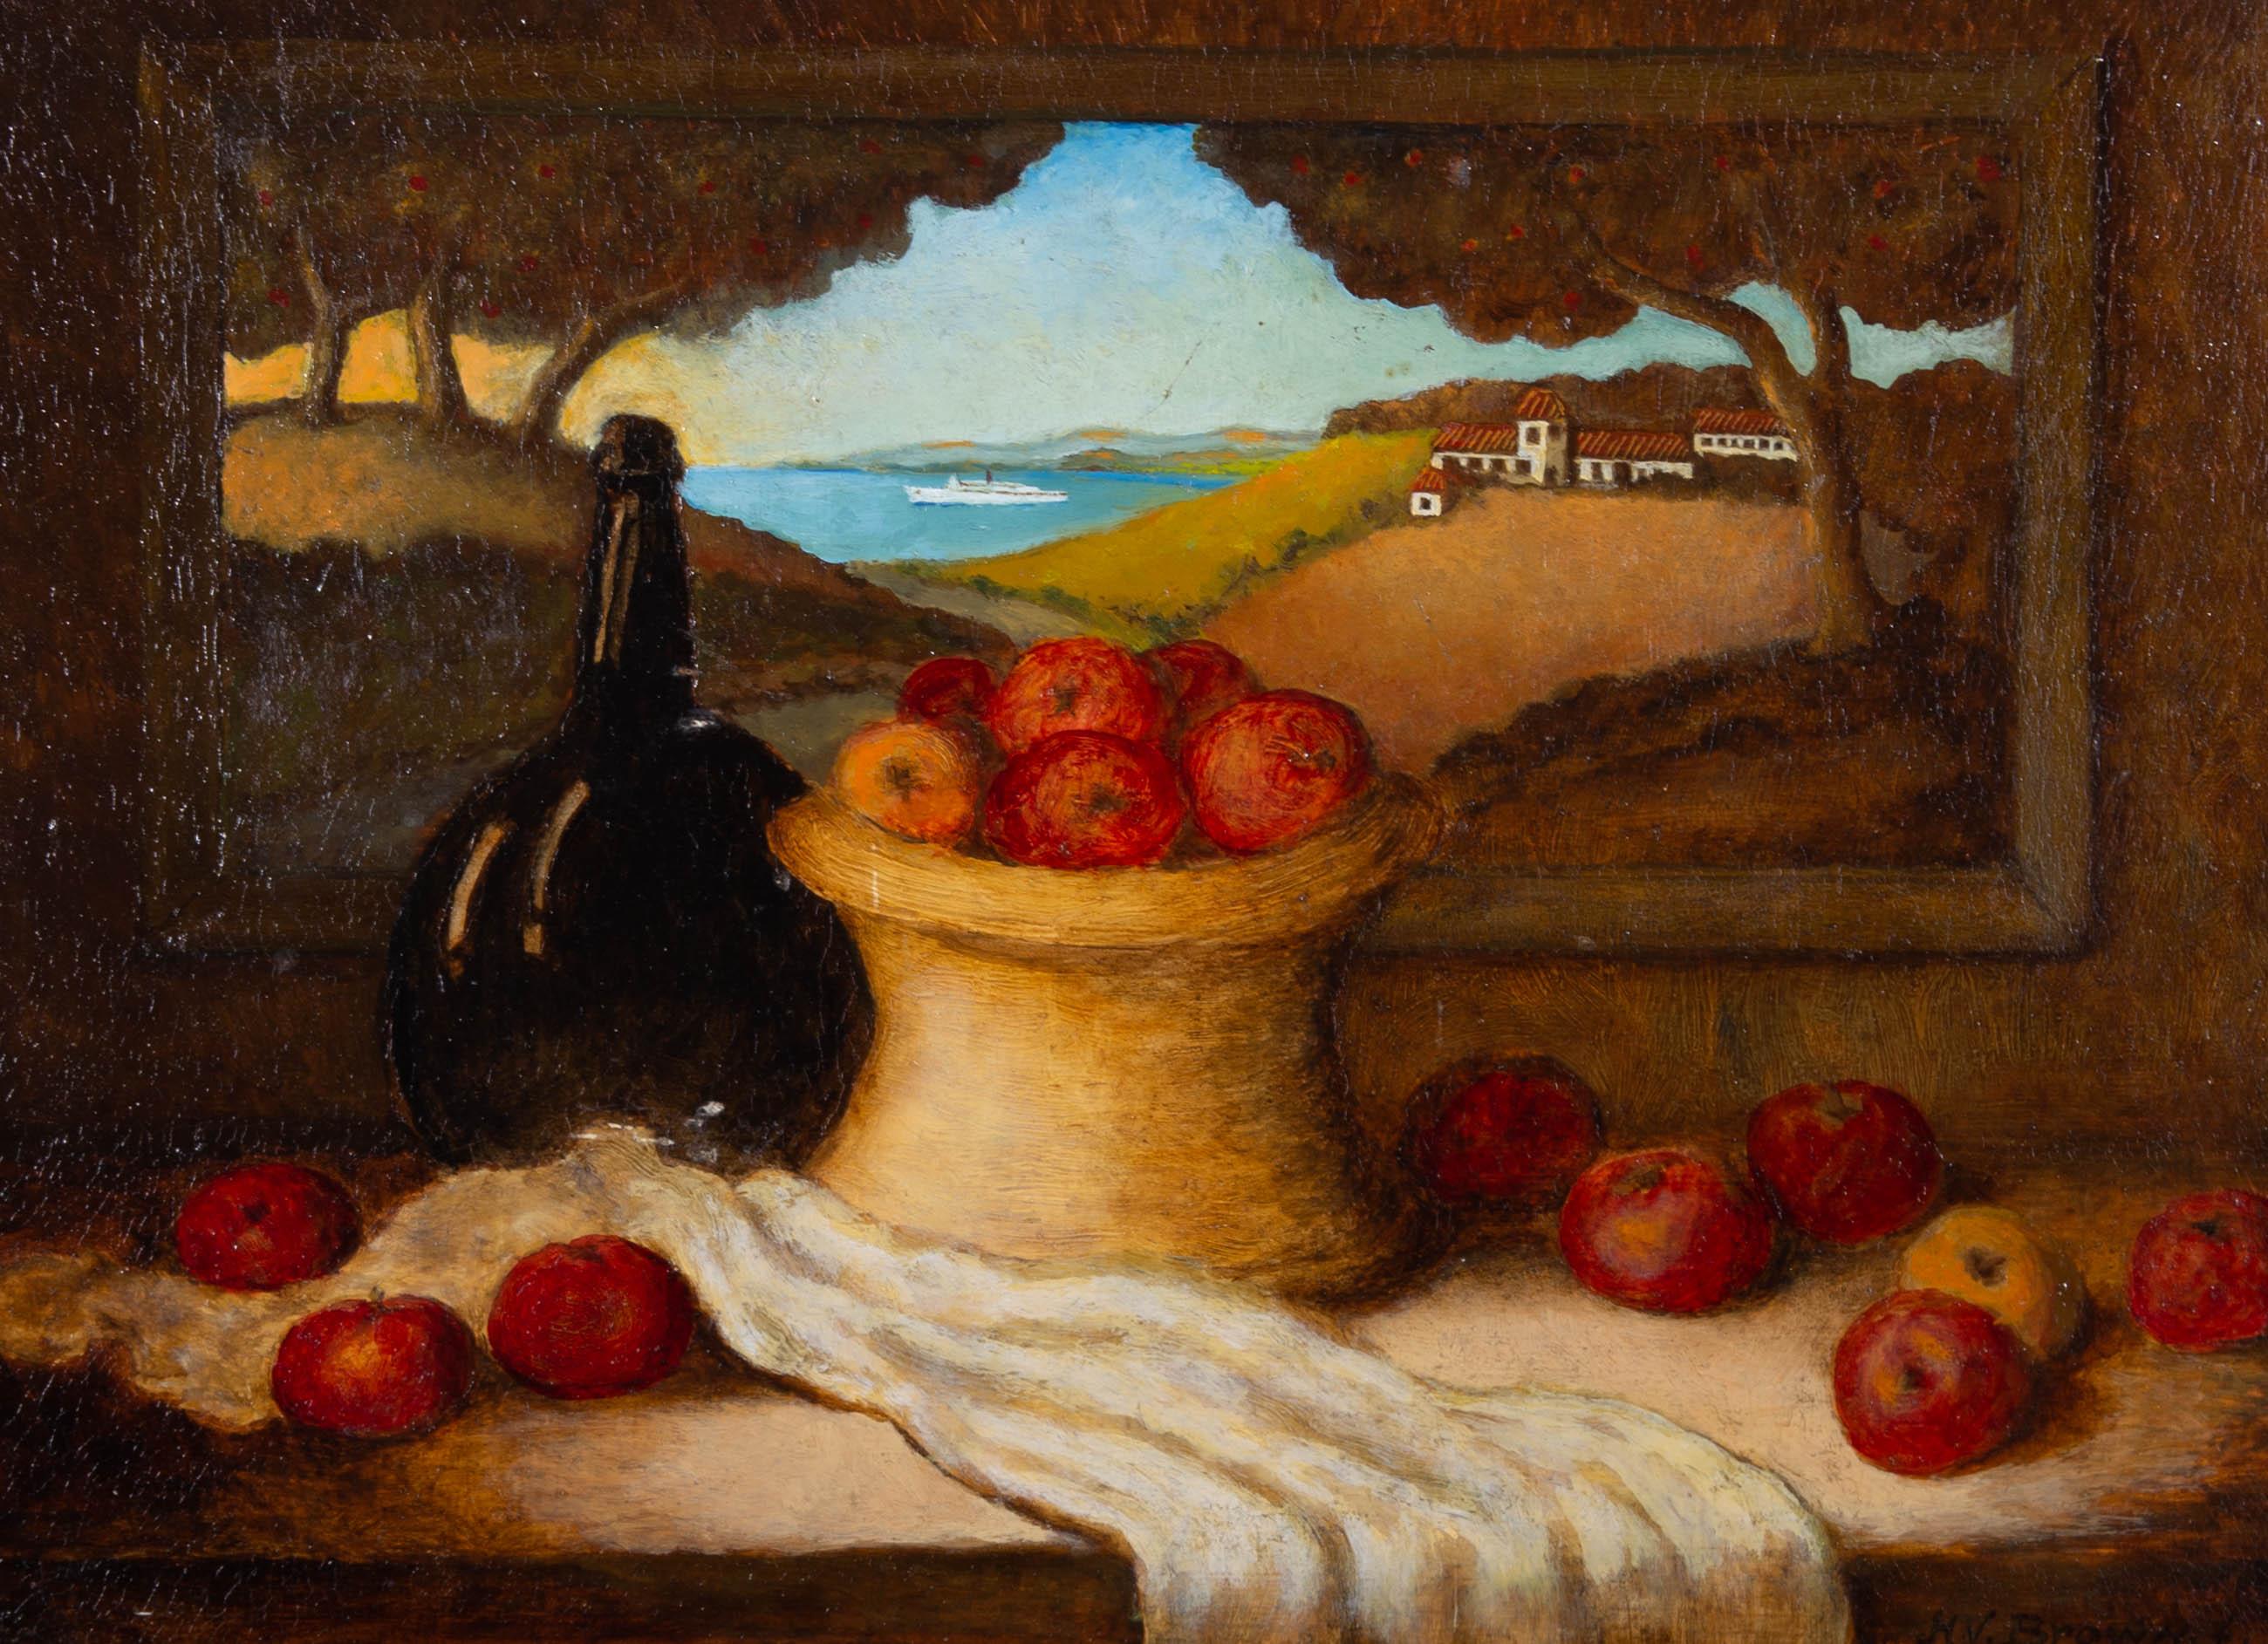 This vibrant still life study depicts a basket of apples near a dark glass bottle and white cloth. Behind the objects a landscape painting is hung, showing a scenic sunset landscape. The artist has captured a stark contrast between the deep colours